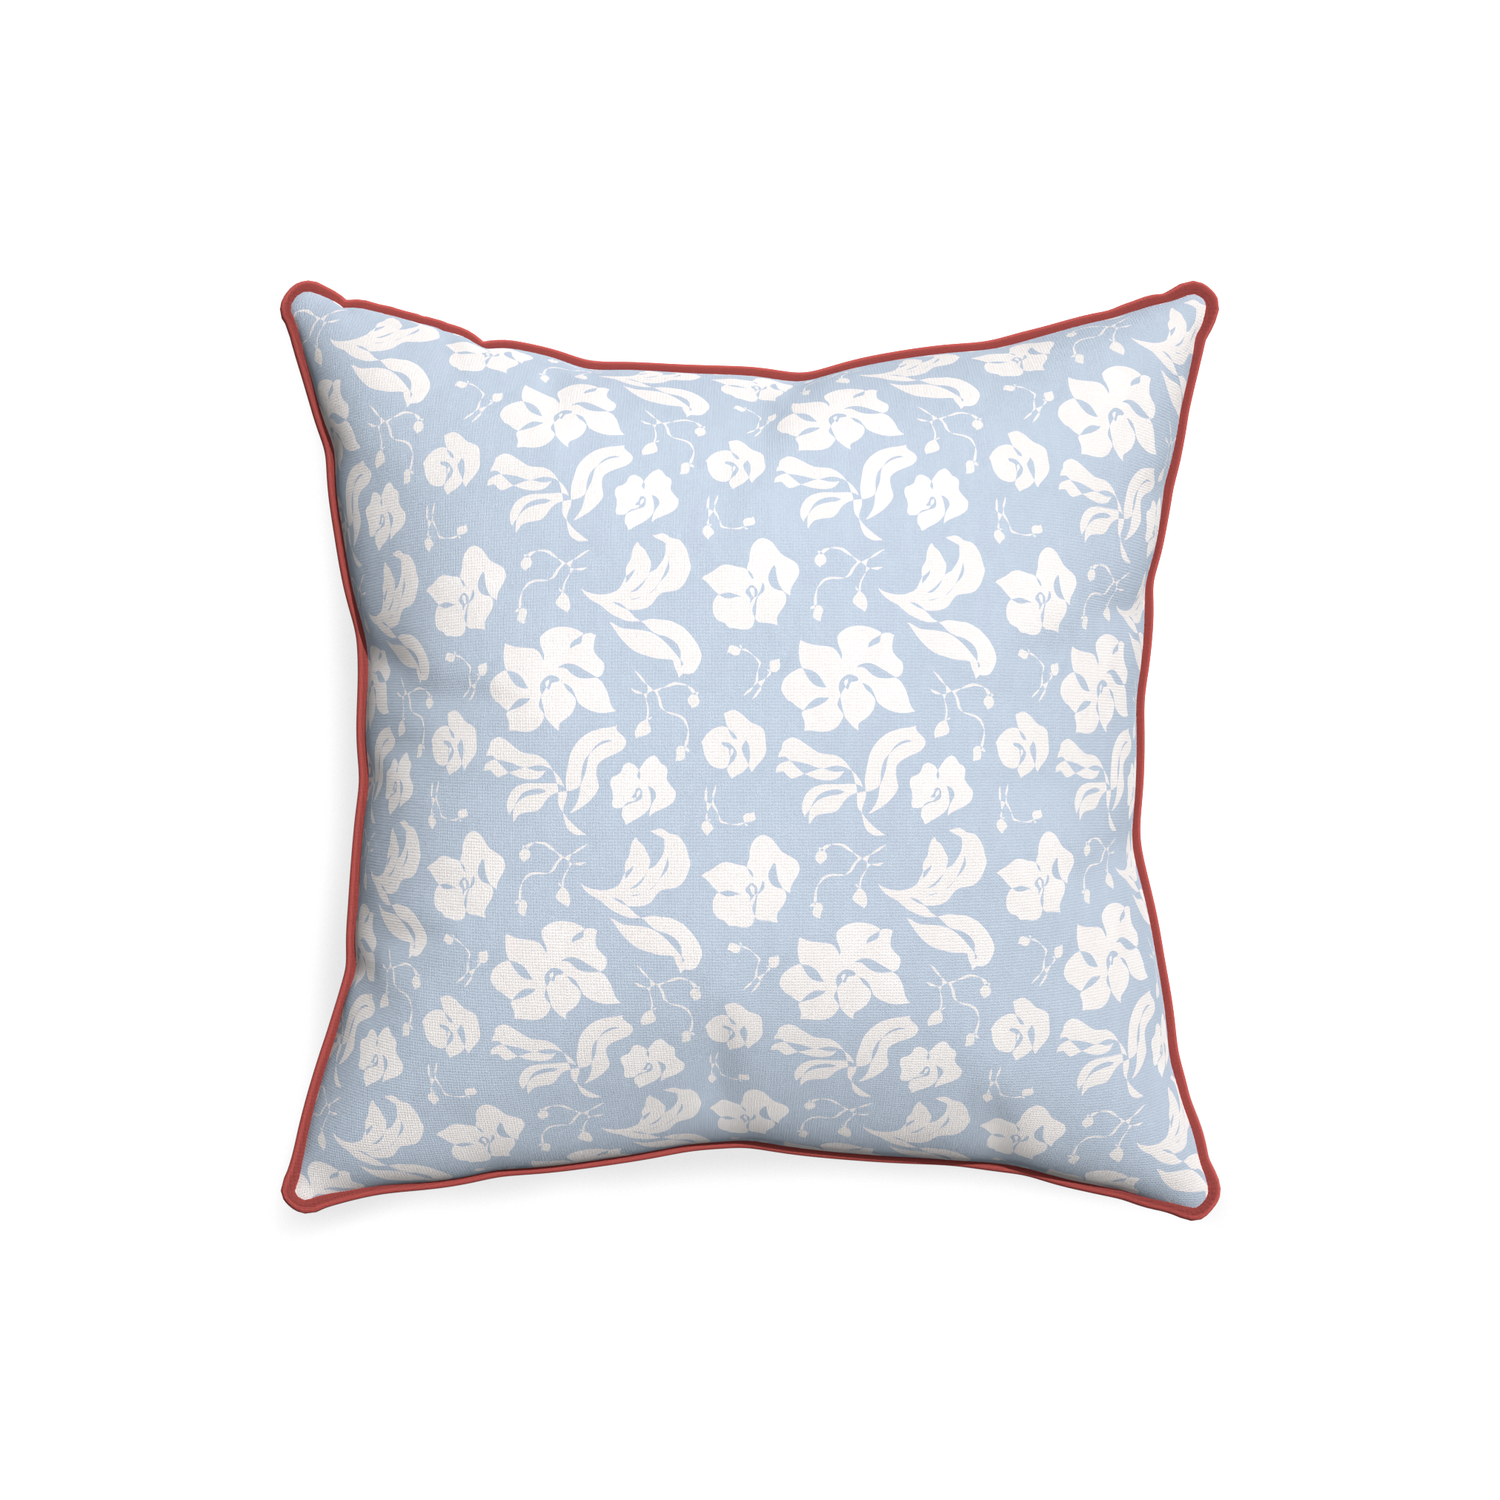 20-square georgia custom pillow with c piping on white background